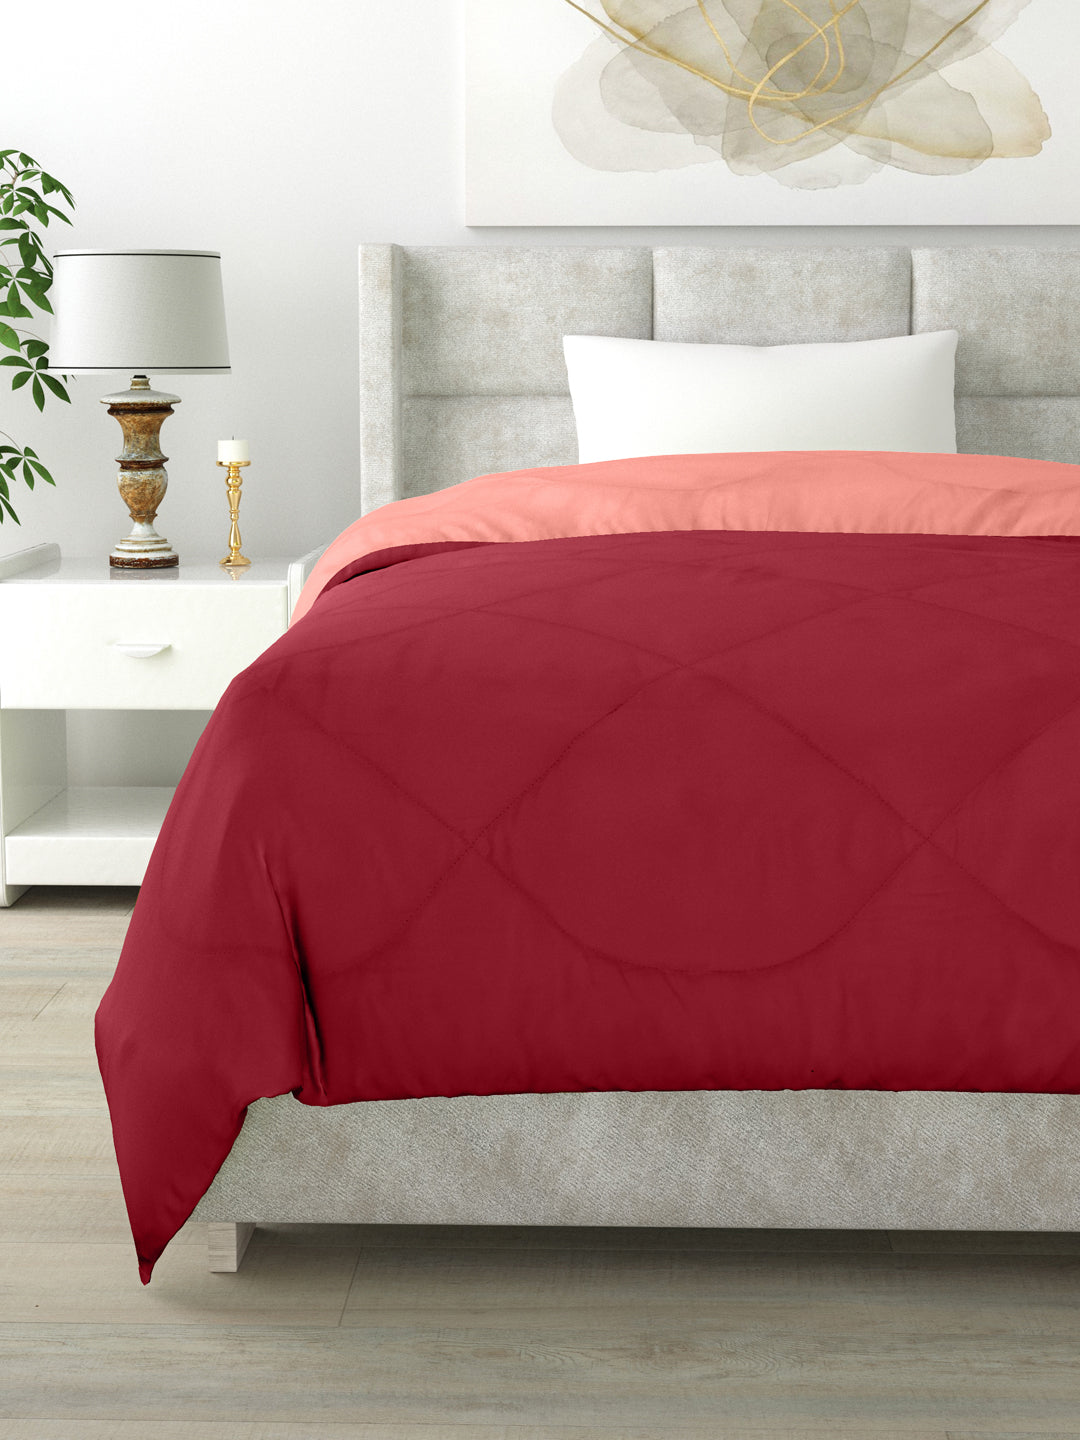 Reversible Single Bed Comforter 200 GSM 60x90 Inches (Maroon & Candy Peach)